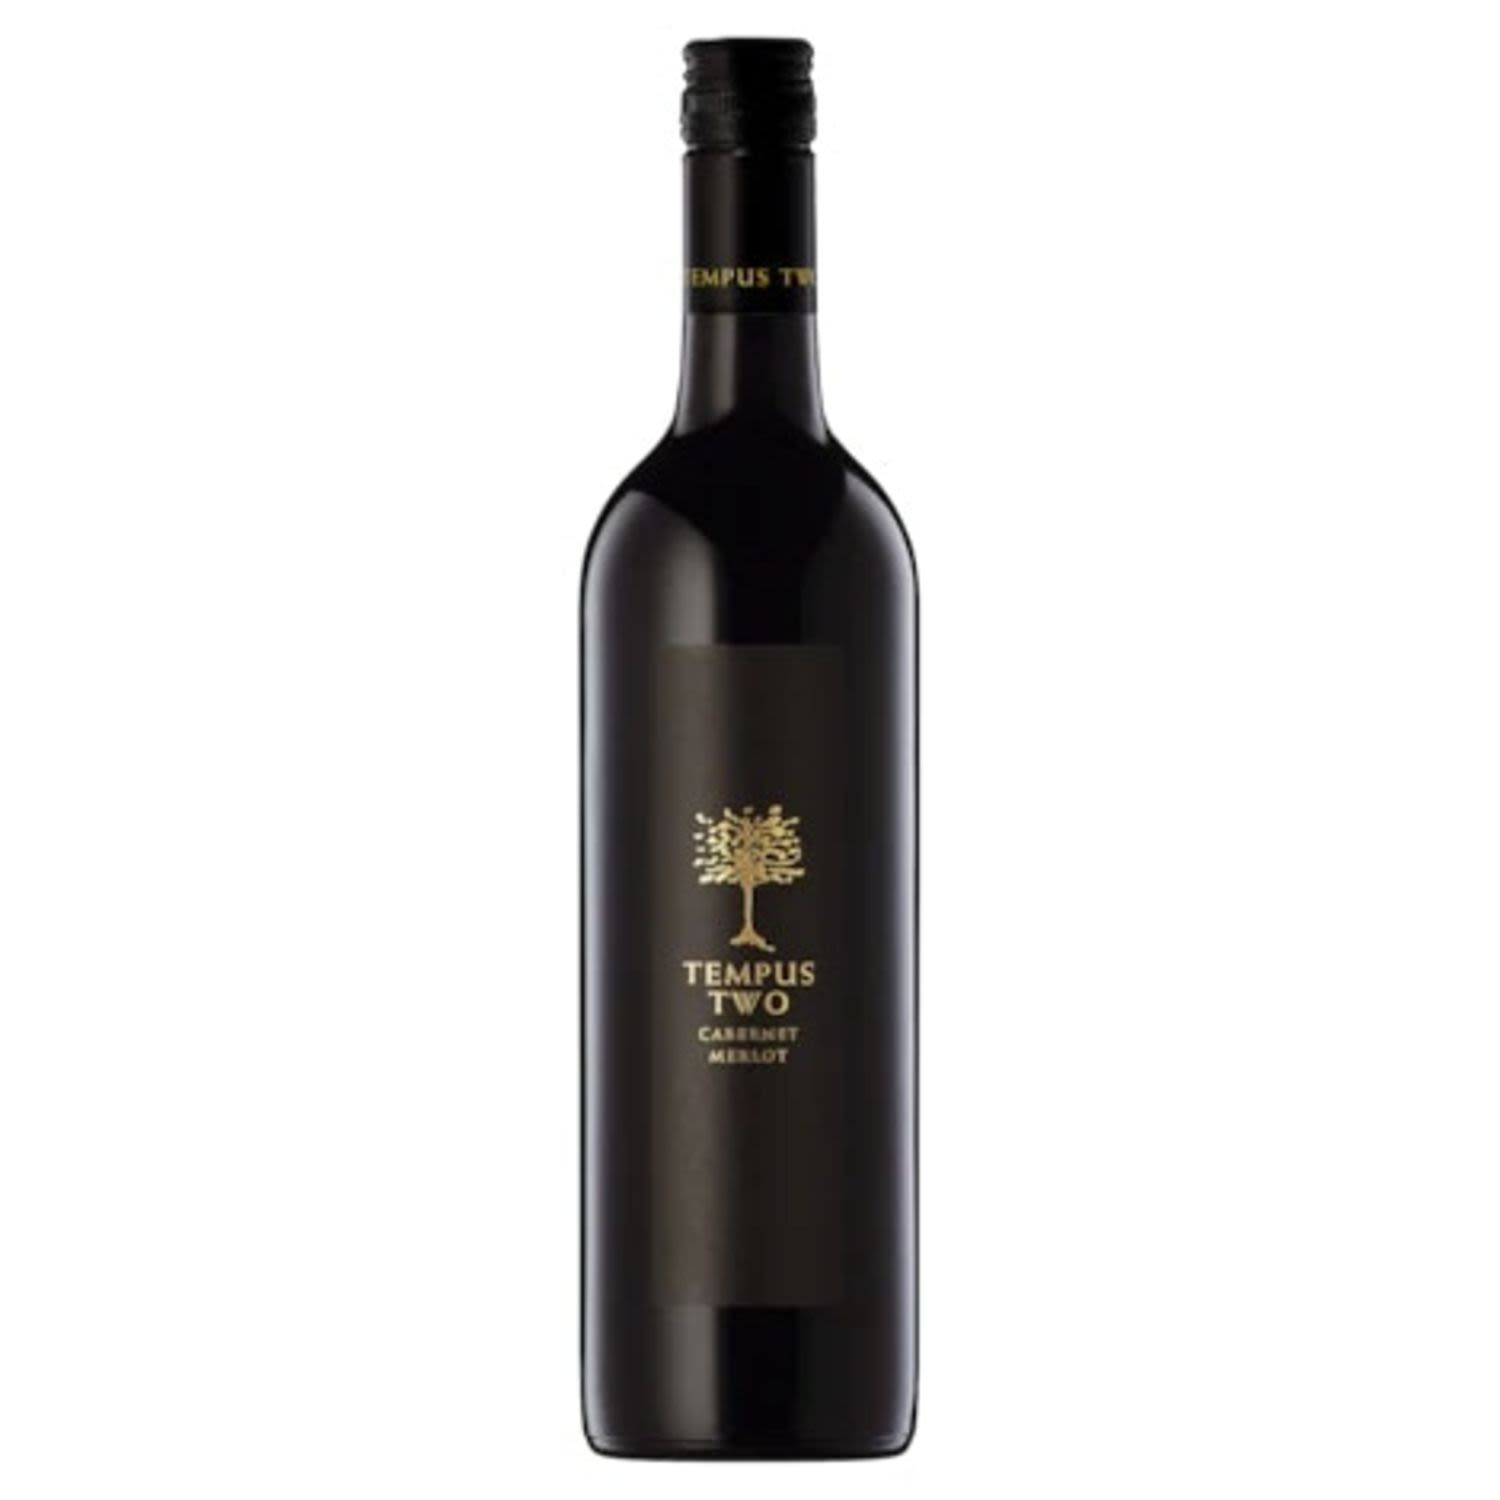 Tempus Two Cabernet Merlot is well-balanced and full-bodied, exhibiting rich berry fruit and chocolate flavours. Matured in both French and American barriques for ten months to capture and enhance the complexities of these two varieties<br /> <br />Alcohol Volume: 13.80%<br /><br />Pack Format: Bottle<br /><br />Standard Drinks: 7.1</br /><br />Pack Type: Bottle<br /><br />Country of Origin: Australia<br /><br />Region: South Australia<br /><br />Vintage: Non Vintage<br />